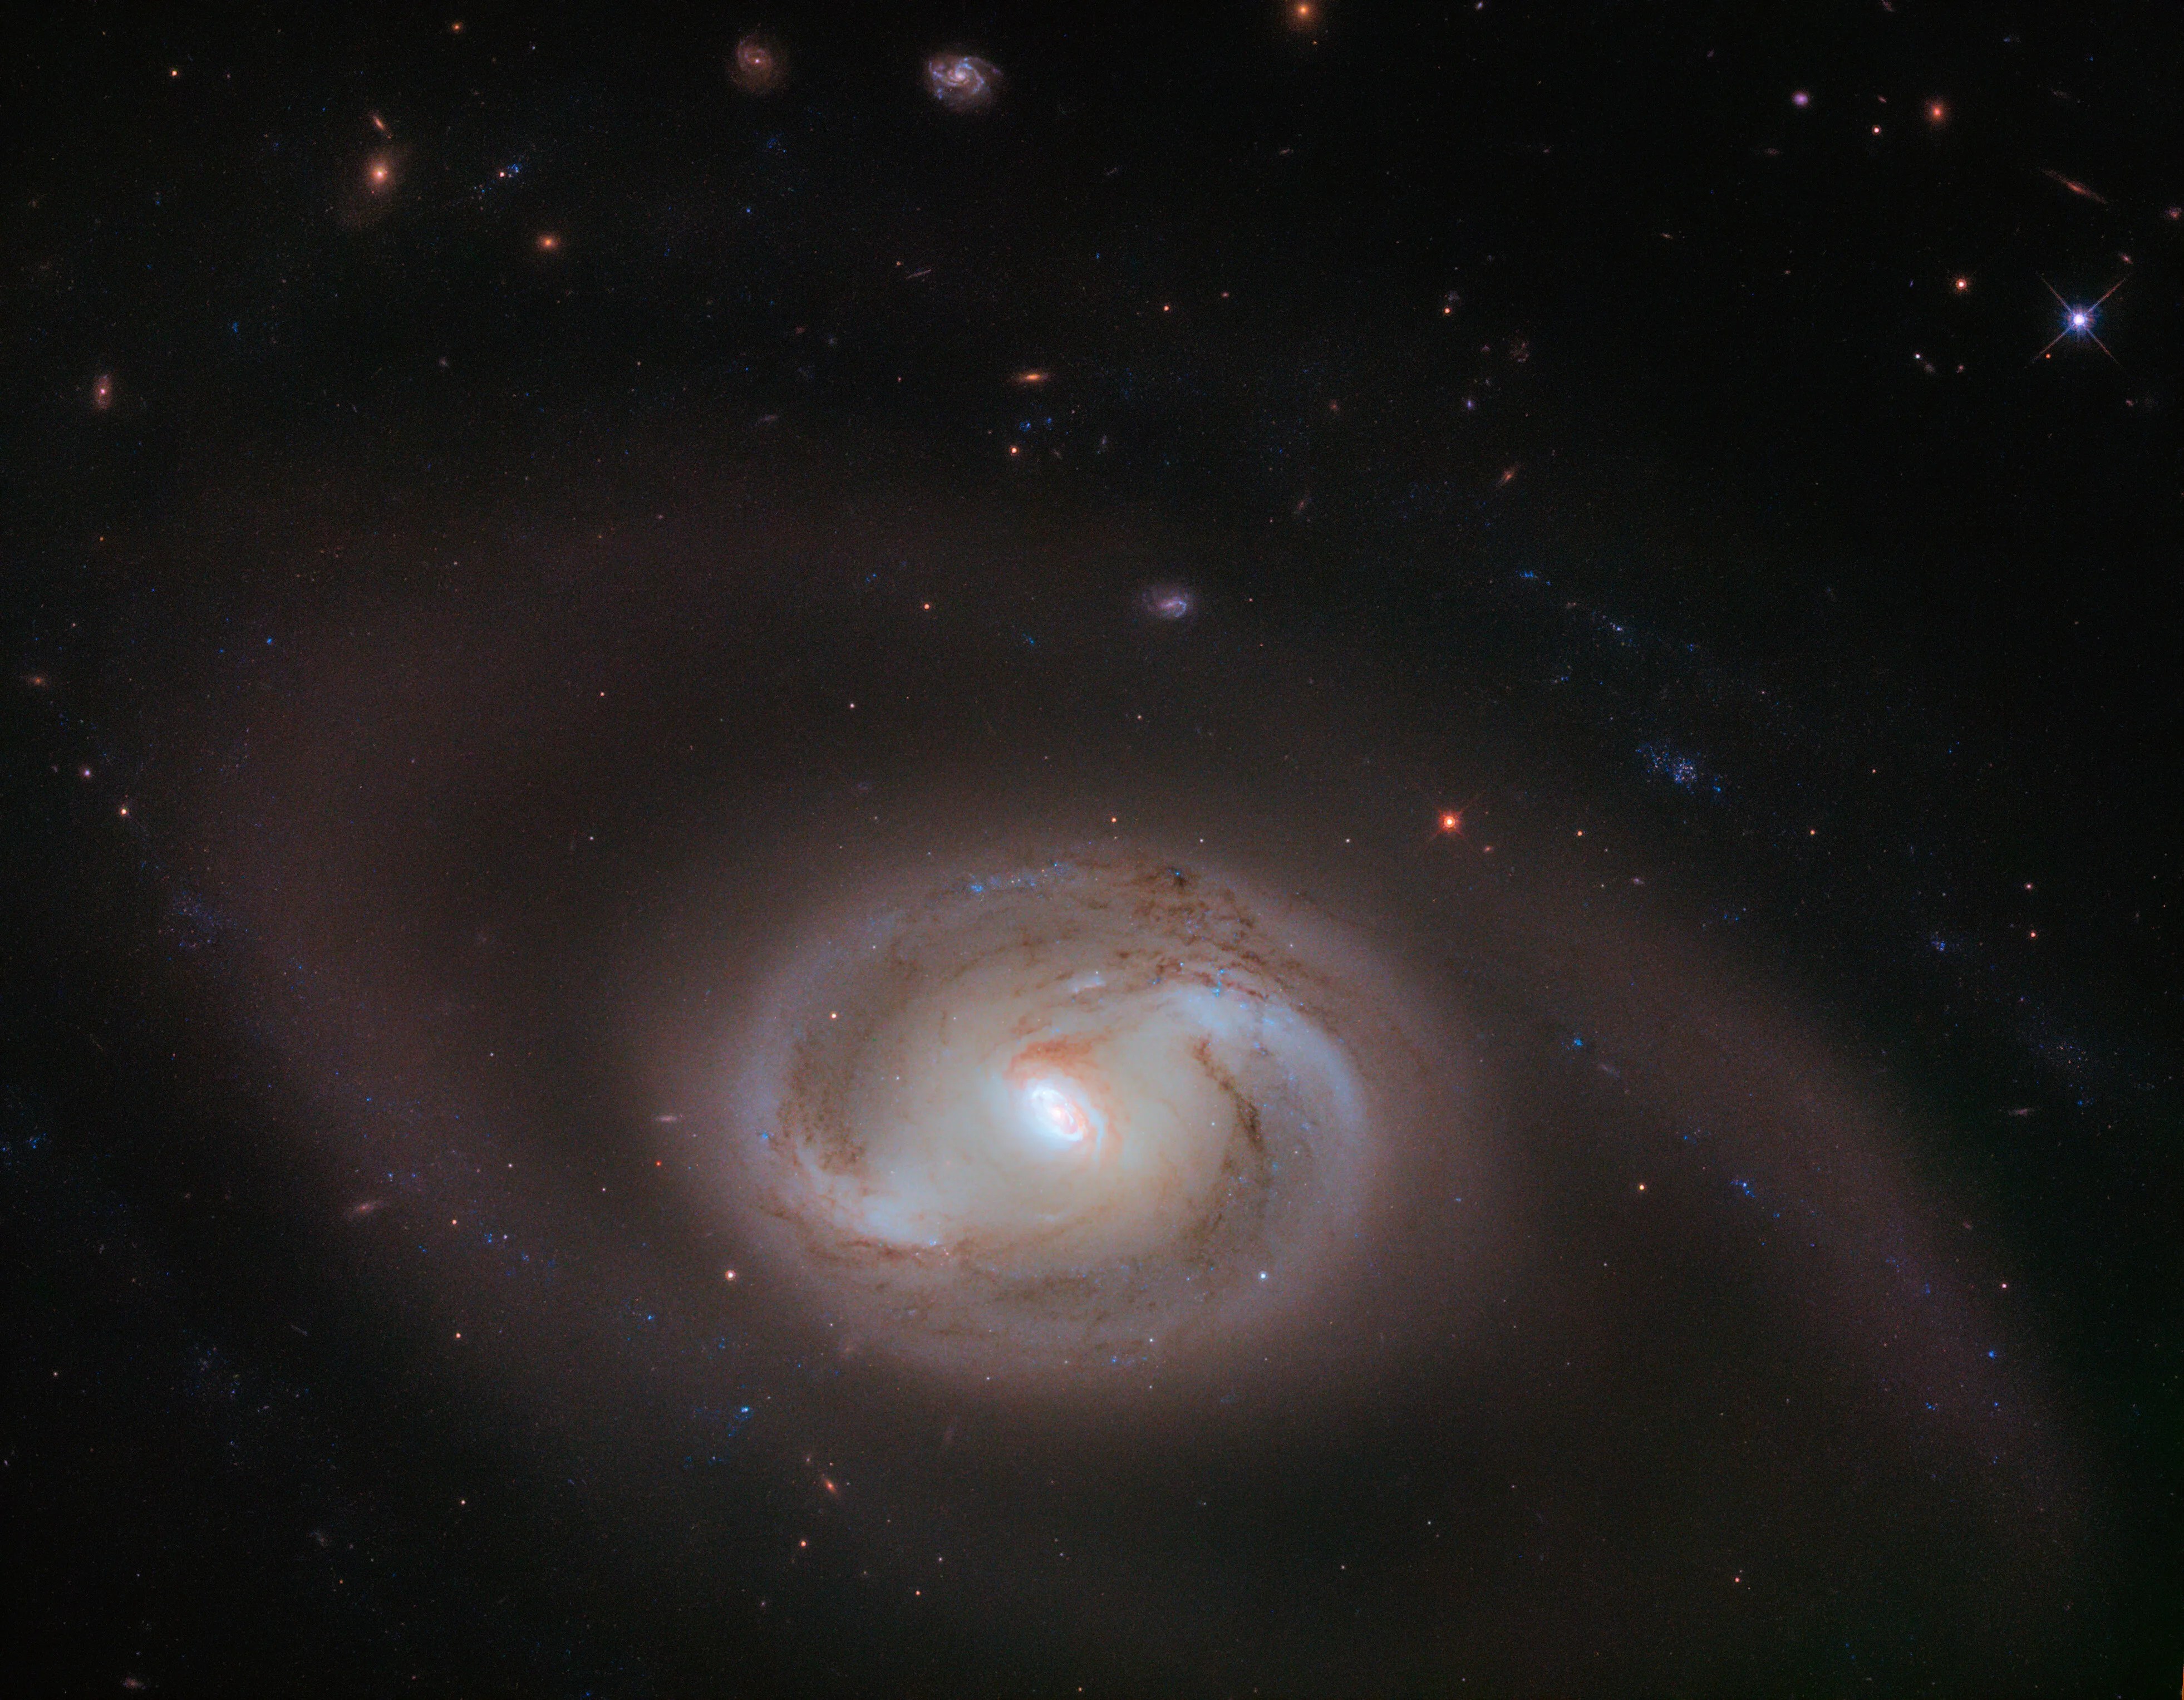 Hubble image of ngc 2273: bright spiral shapes against black backdrop of space